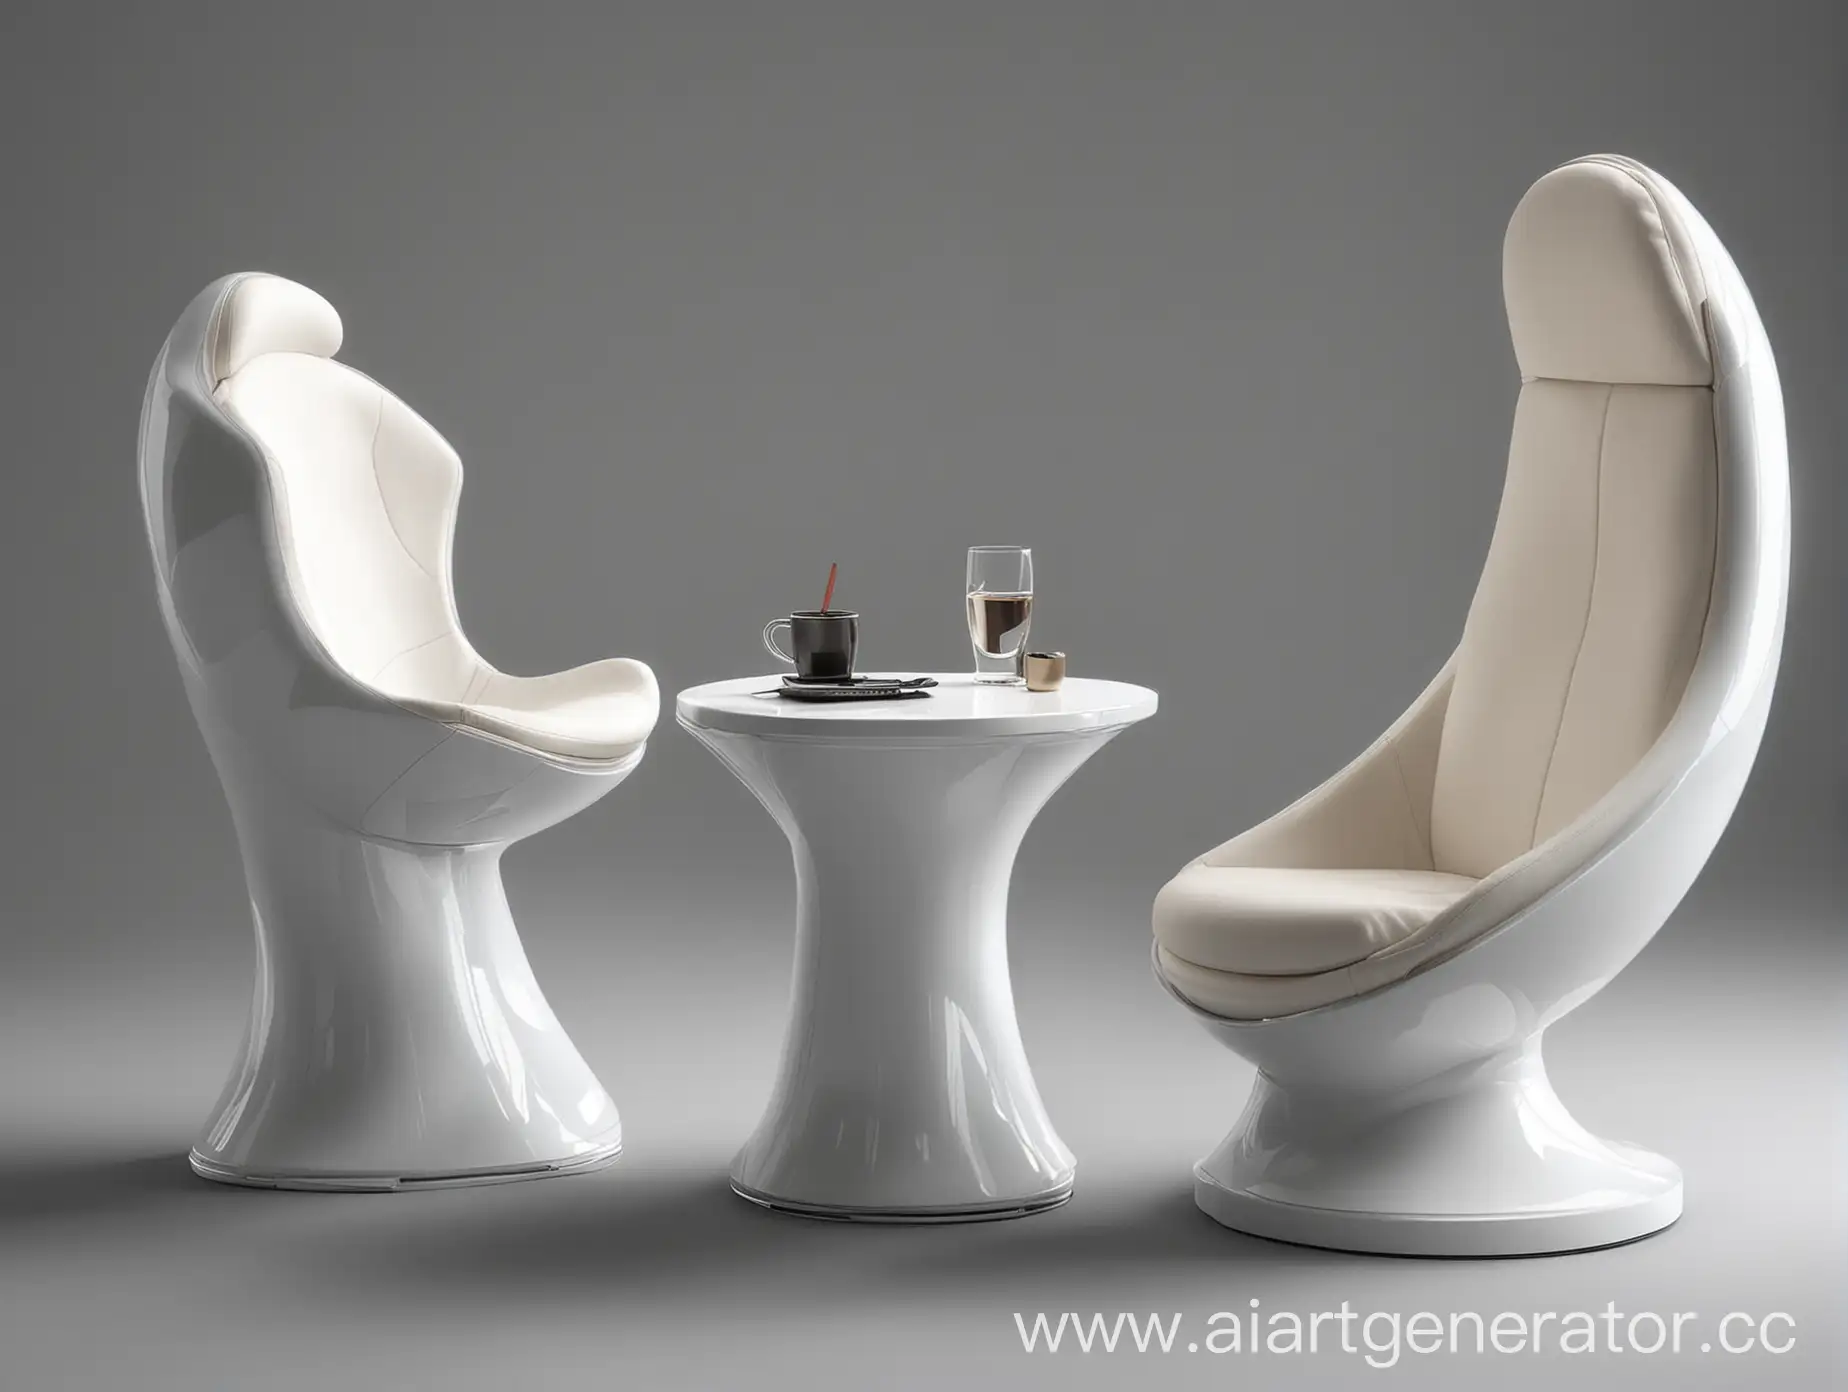 Futuristic-SemiCircular-Chair-with-Spherical-Dynamics-and-Mini-Table